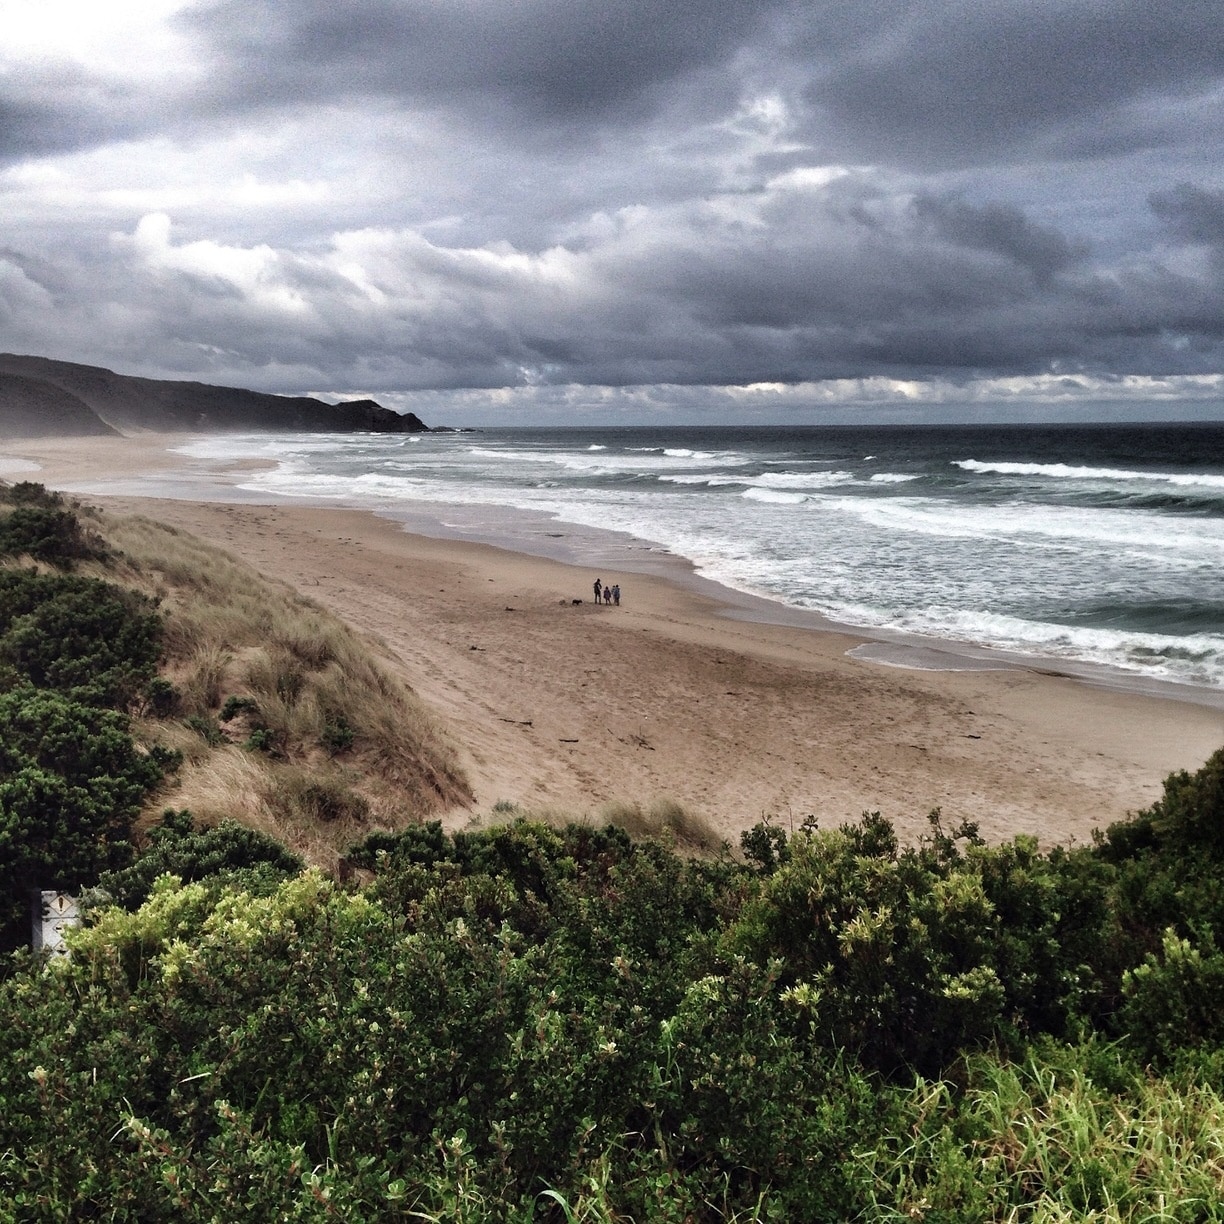 One of our favourite beaches! Not wise to swim here, but great spot for walking. About 45 min drive to the 12 Apostles.